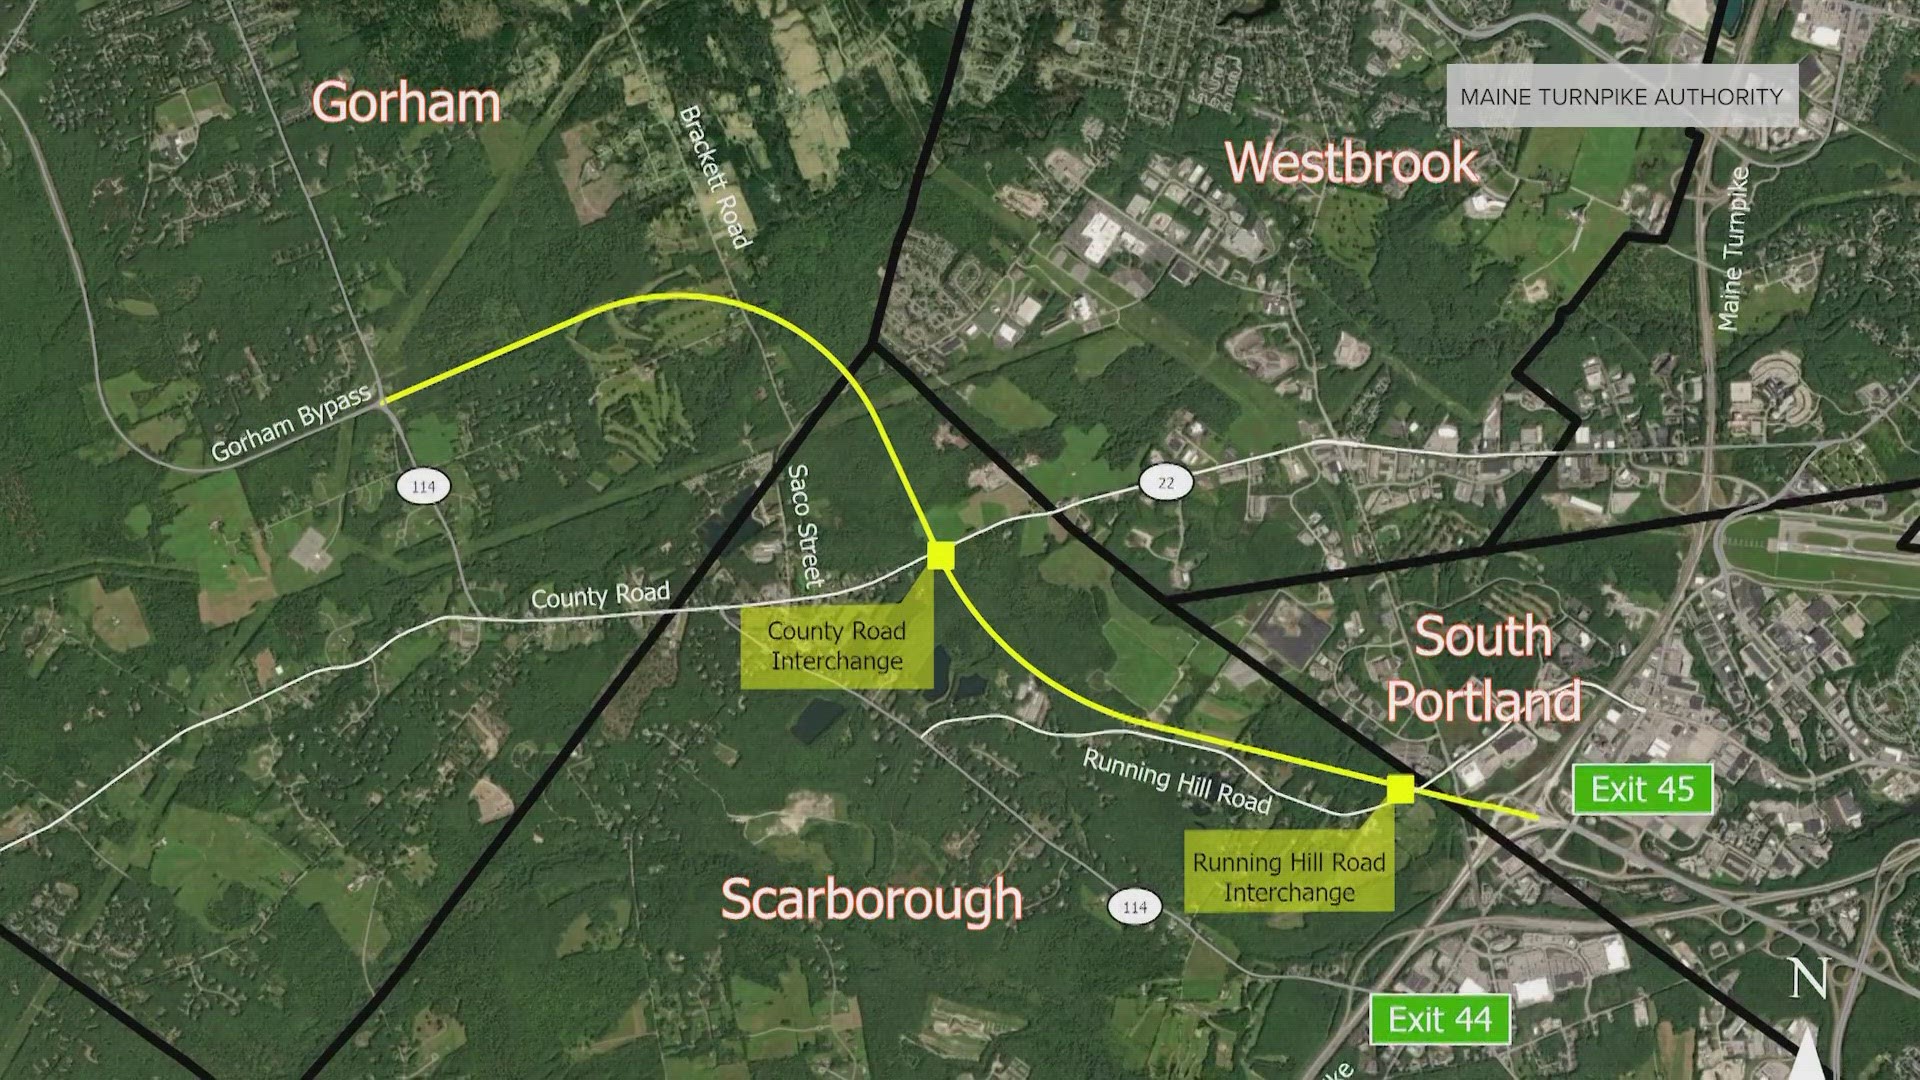 The project would go through Scarborough, Westbrook, South Portland, and Gorham with a goal of easing traffic.